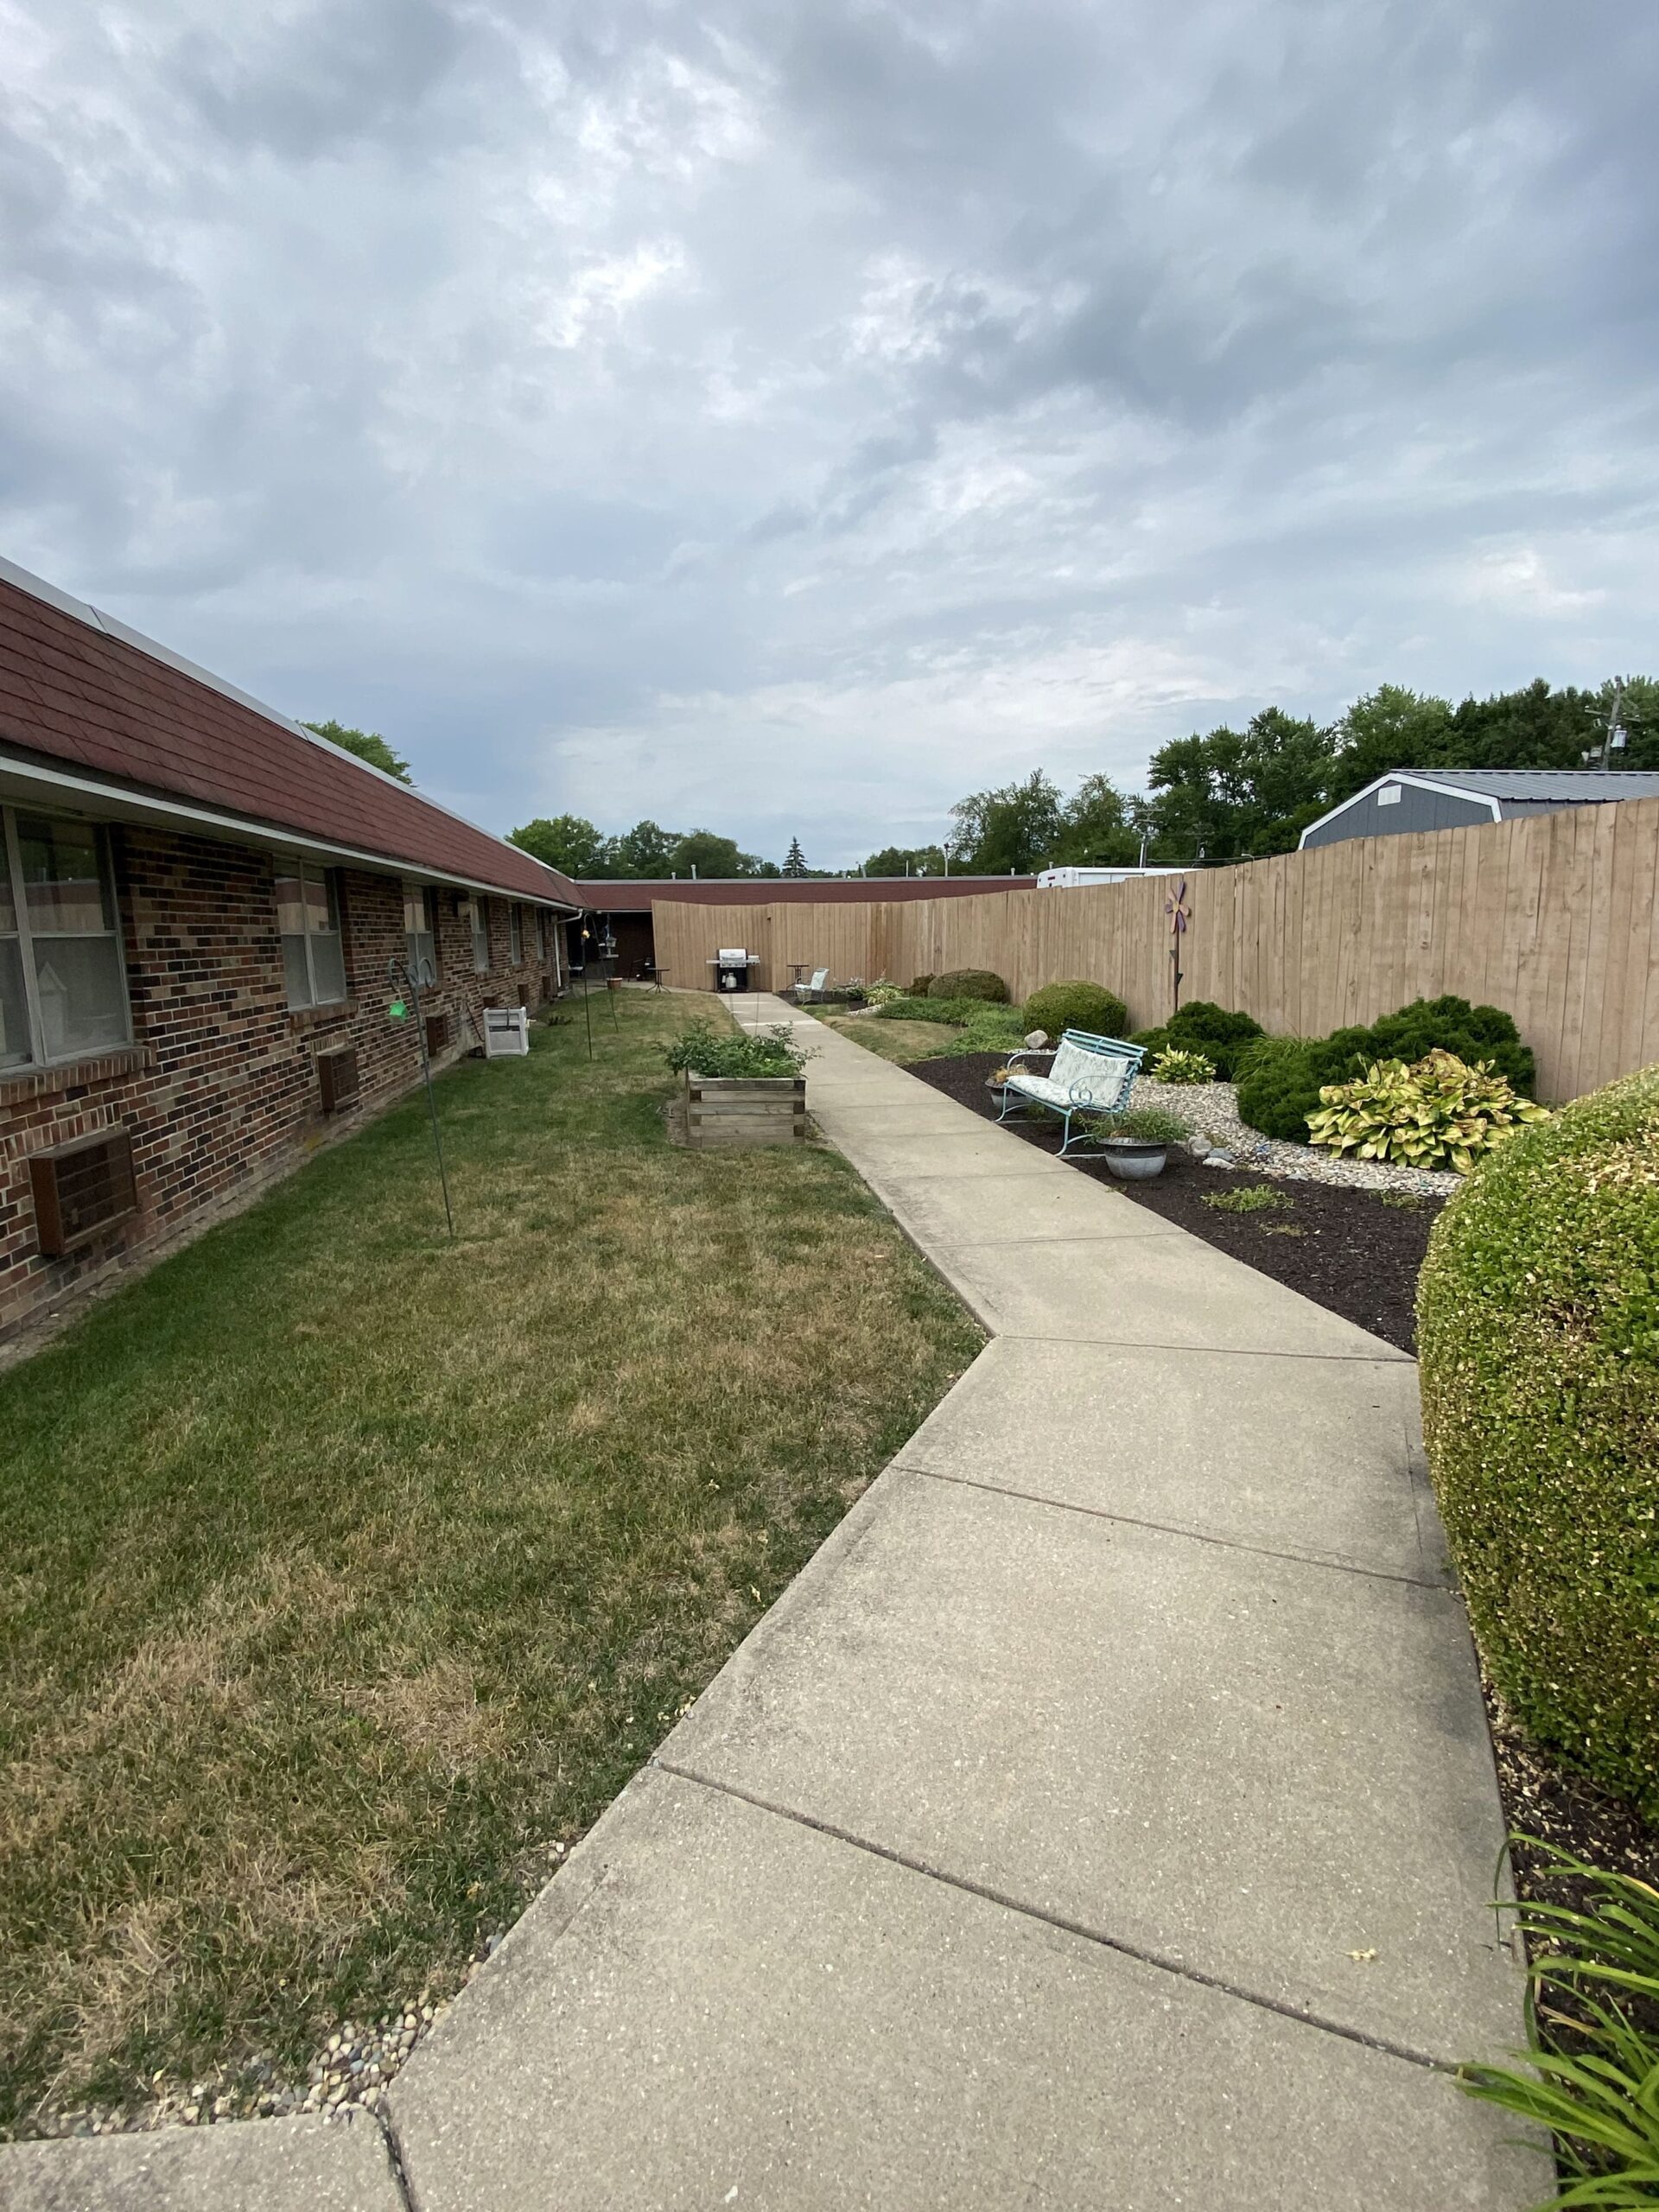 Brickyard Healthcare Sycamore Village Care Center exterior pathway for residents to walk